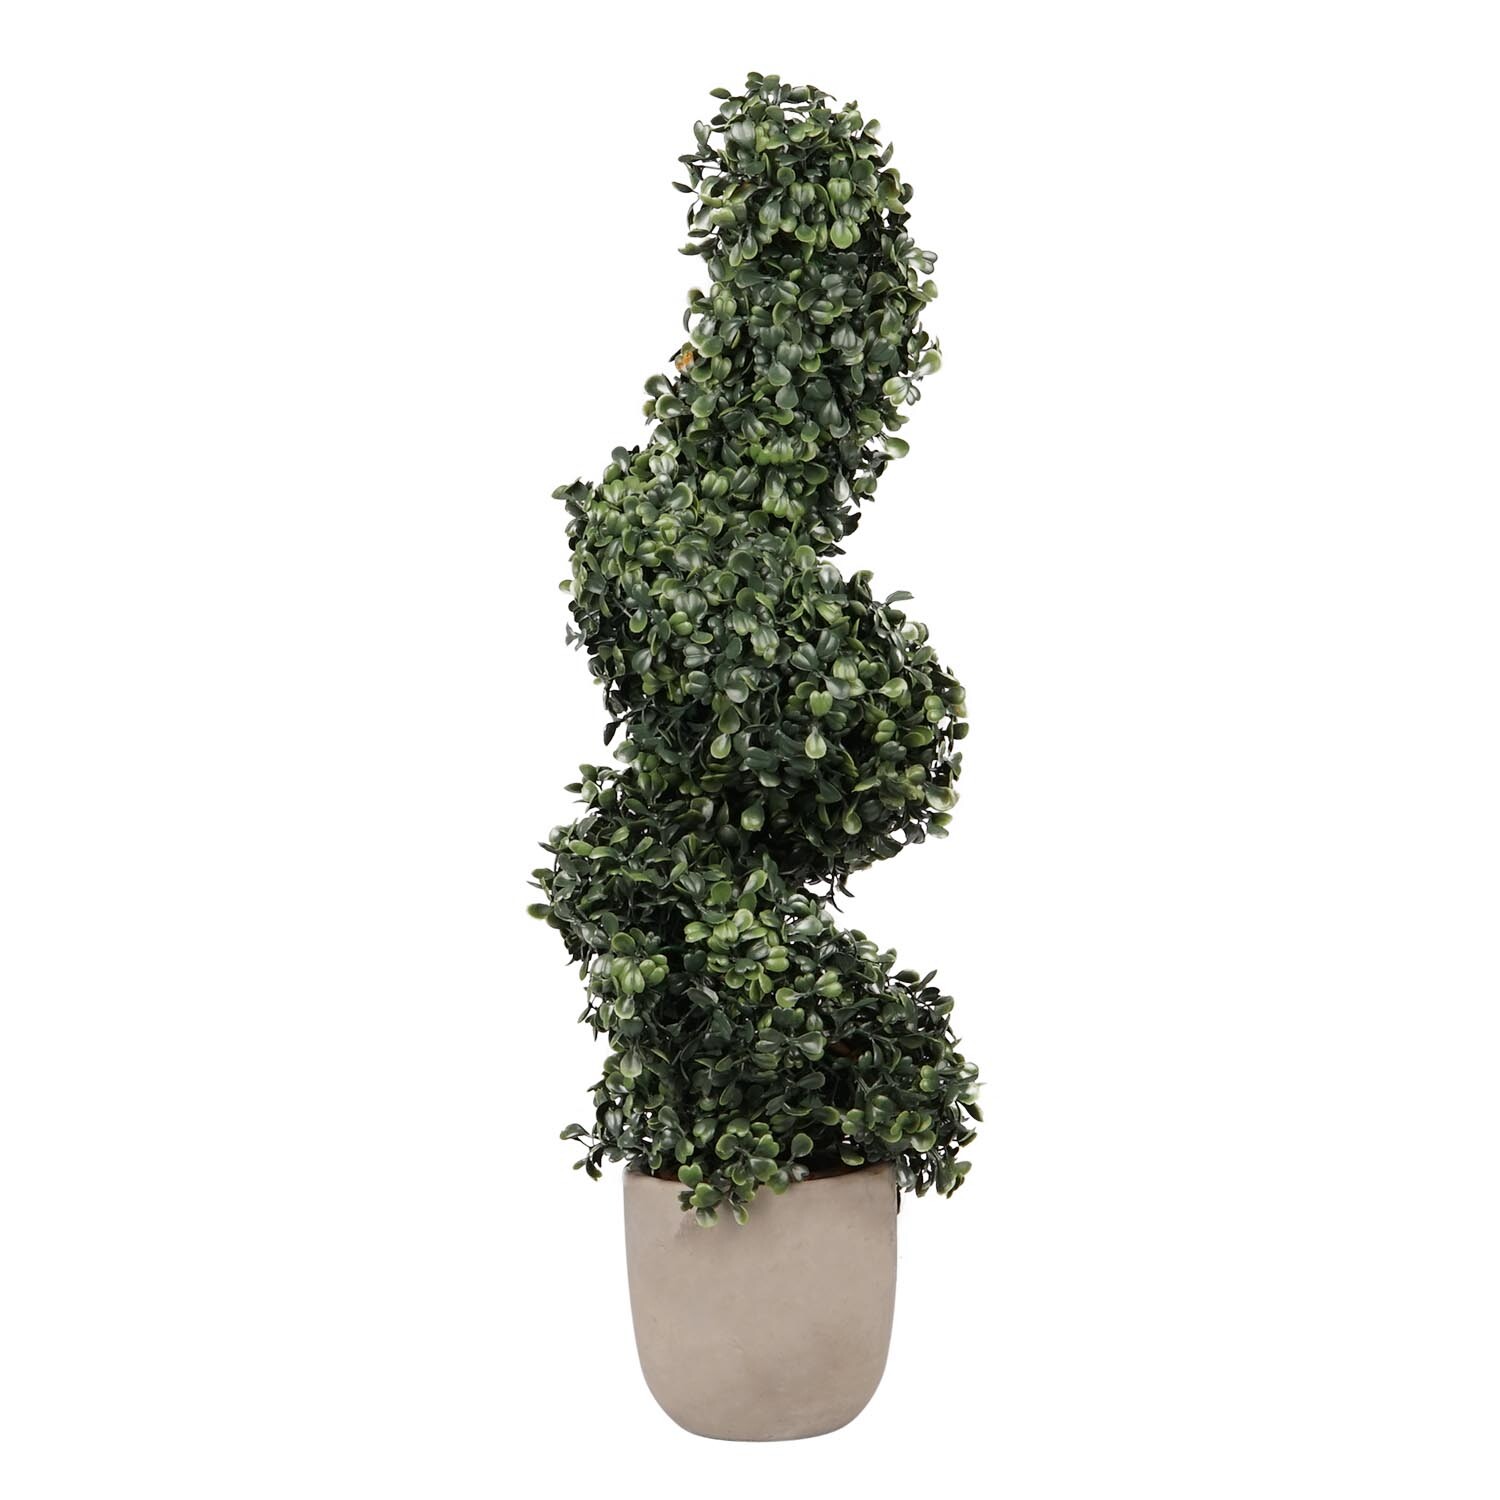 Faux Spiral Ivy in White Ceramic Pot Artificial Plant Image